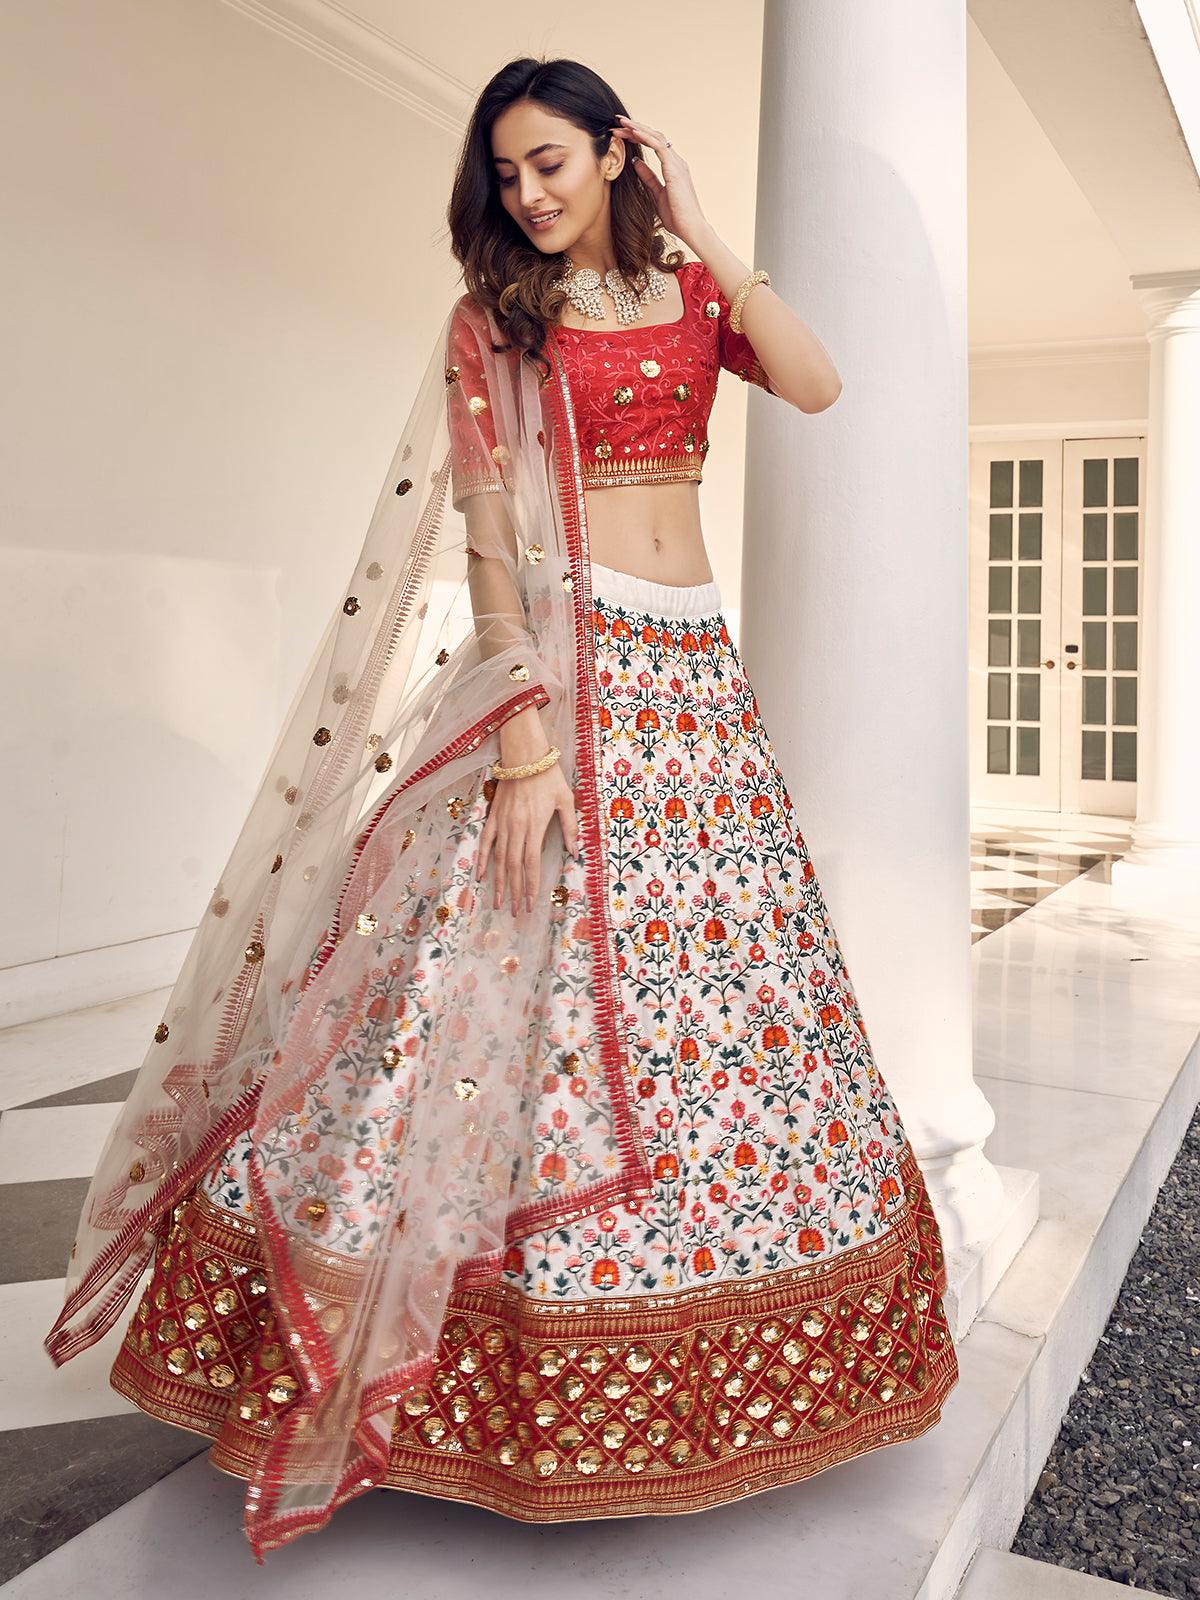 Beachside Wedding With The Bride In A Pastel Lehenga & Bandhani Dupatta |  Indian bride outfits, Bridal lehenga red, Indian bridal fashion